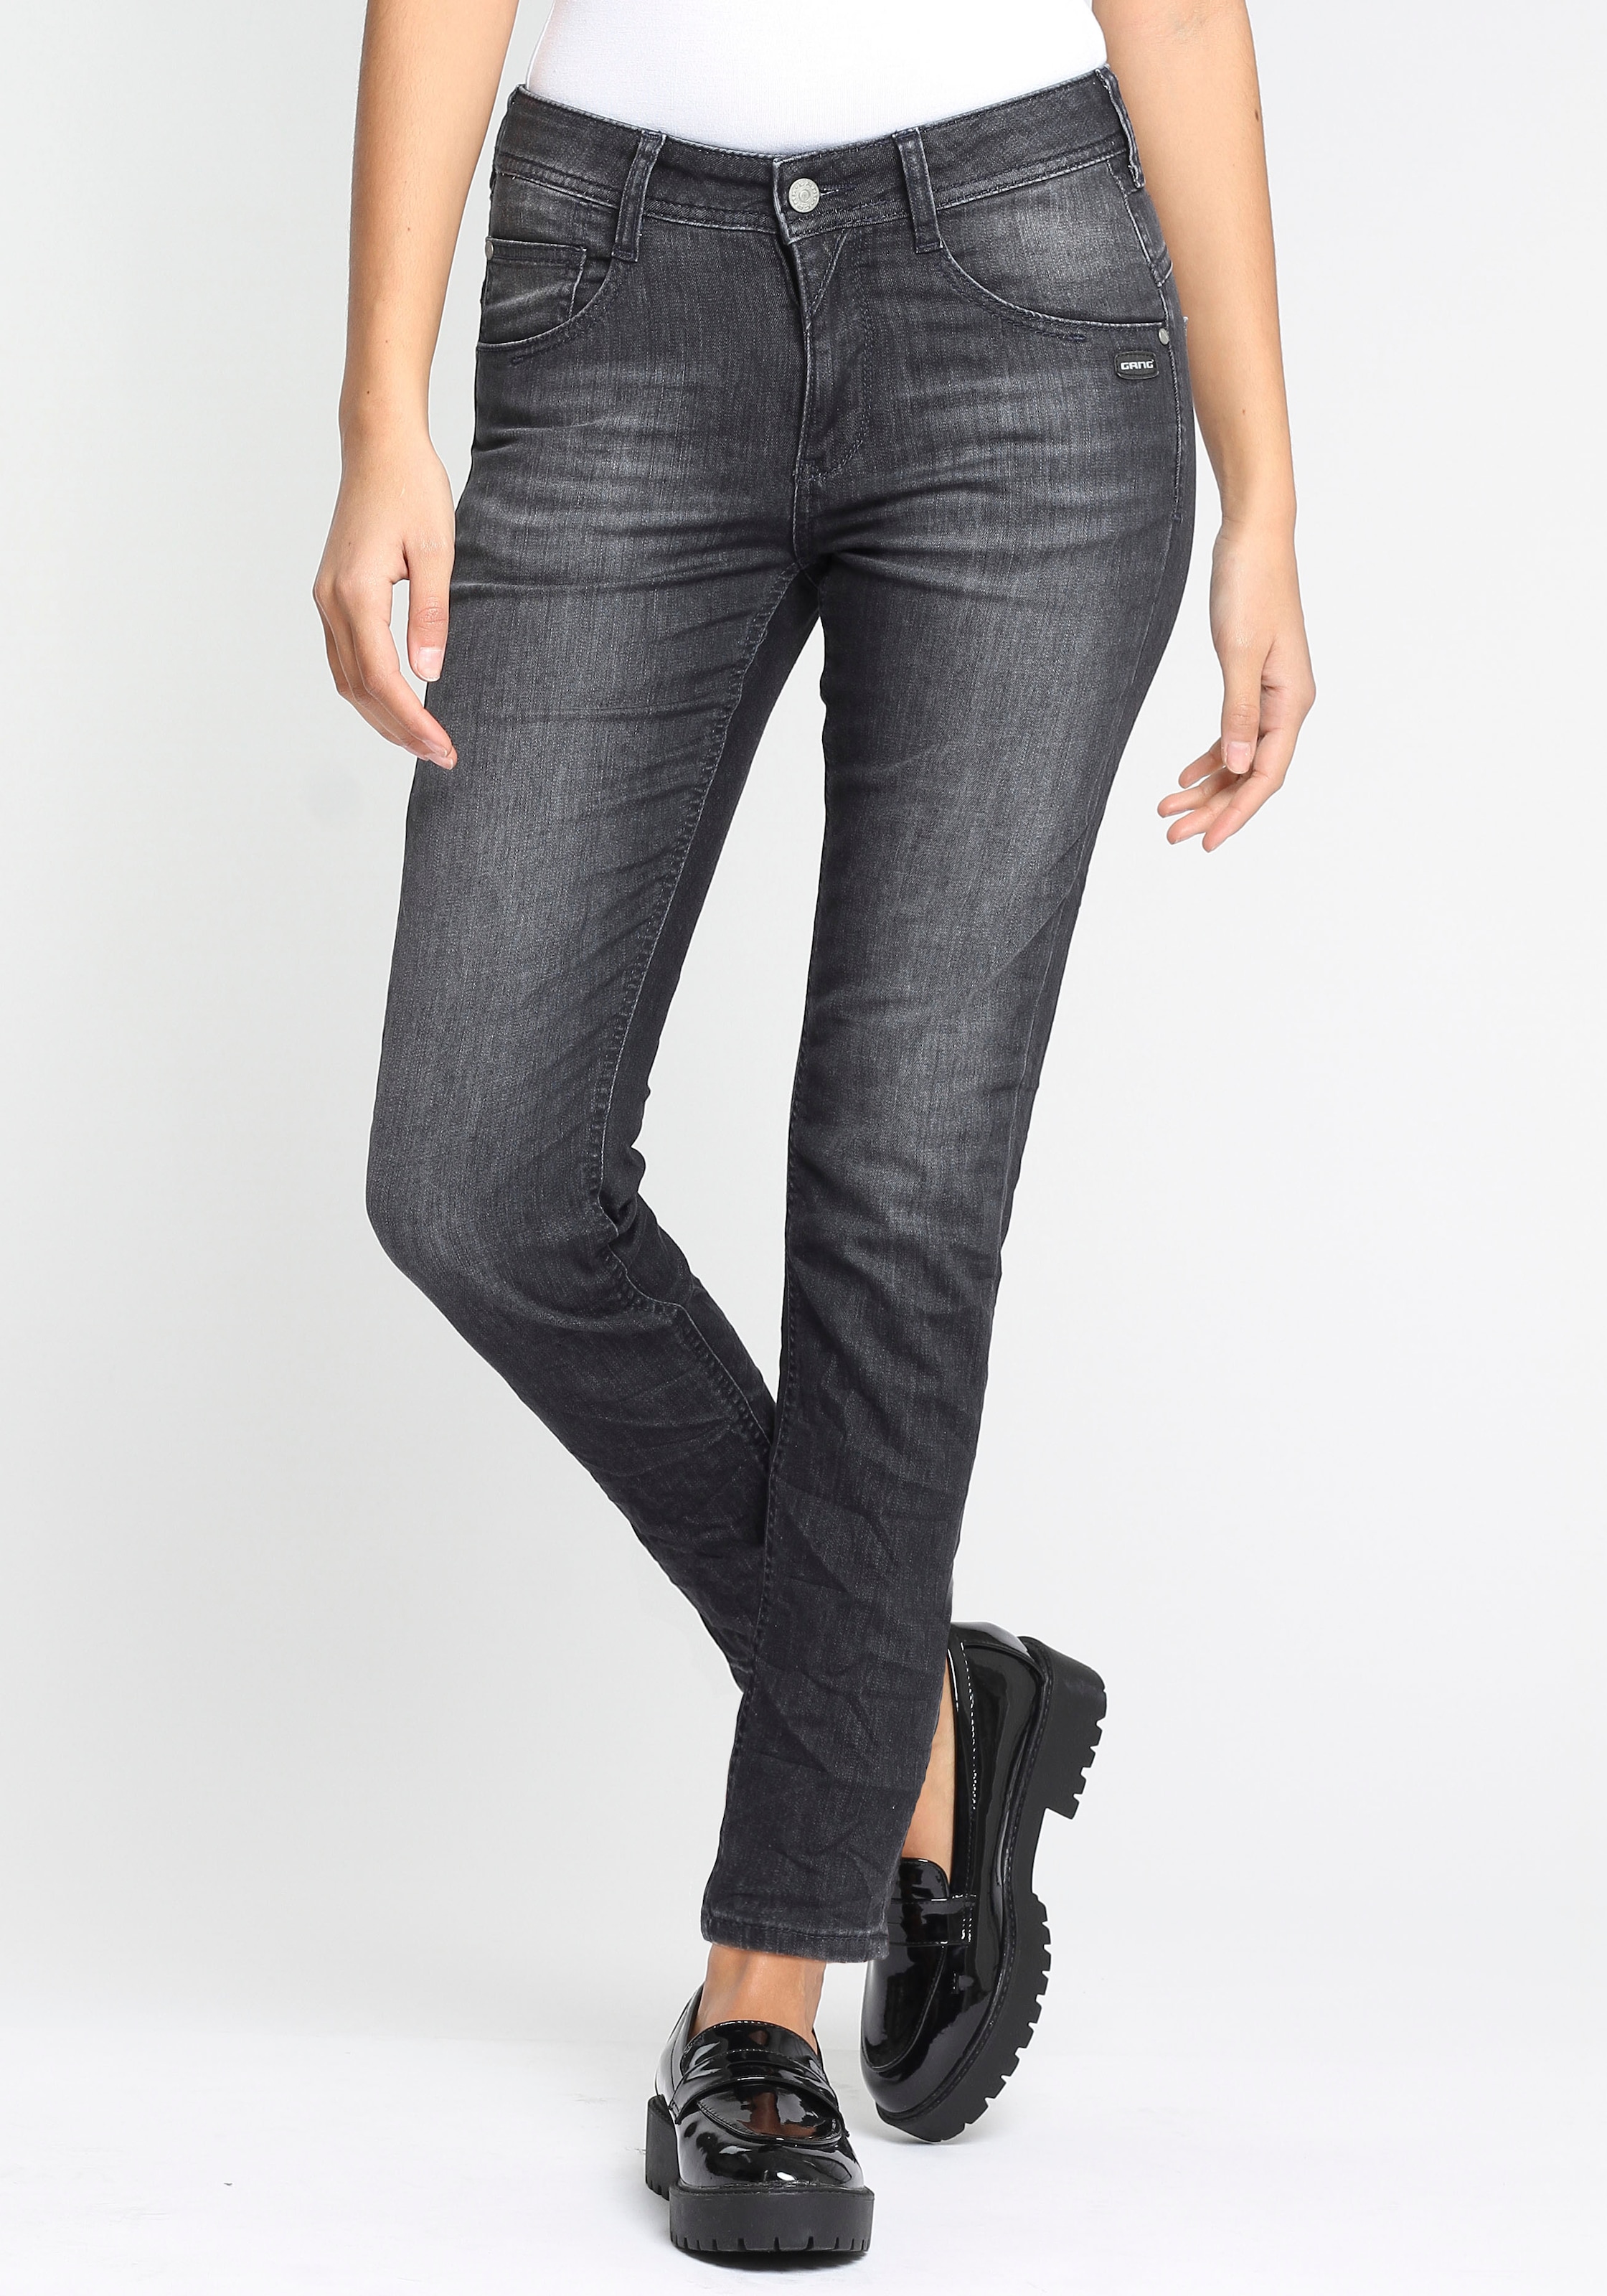 GANG Relax-fit-Jeans »94AMELIE« su doppelte...